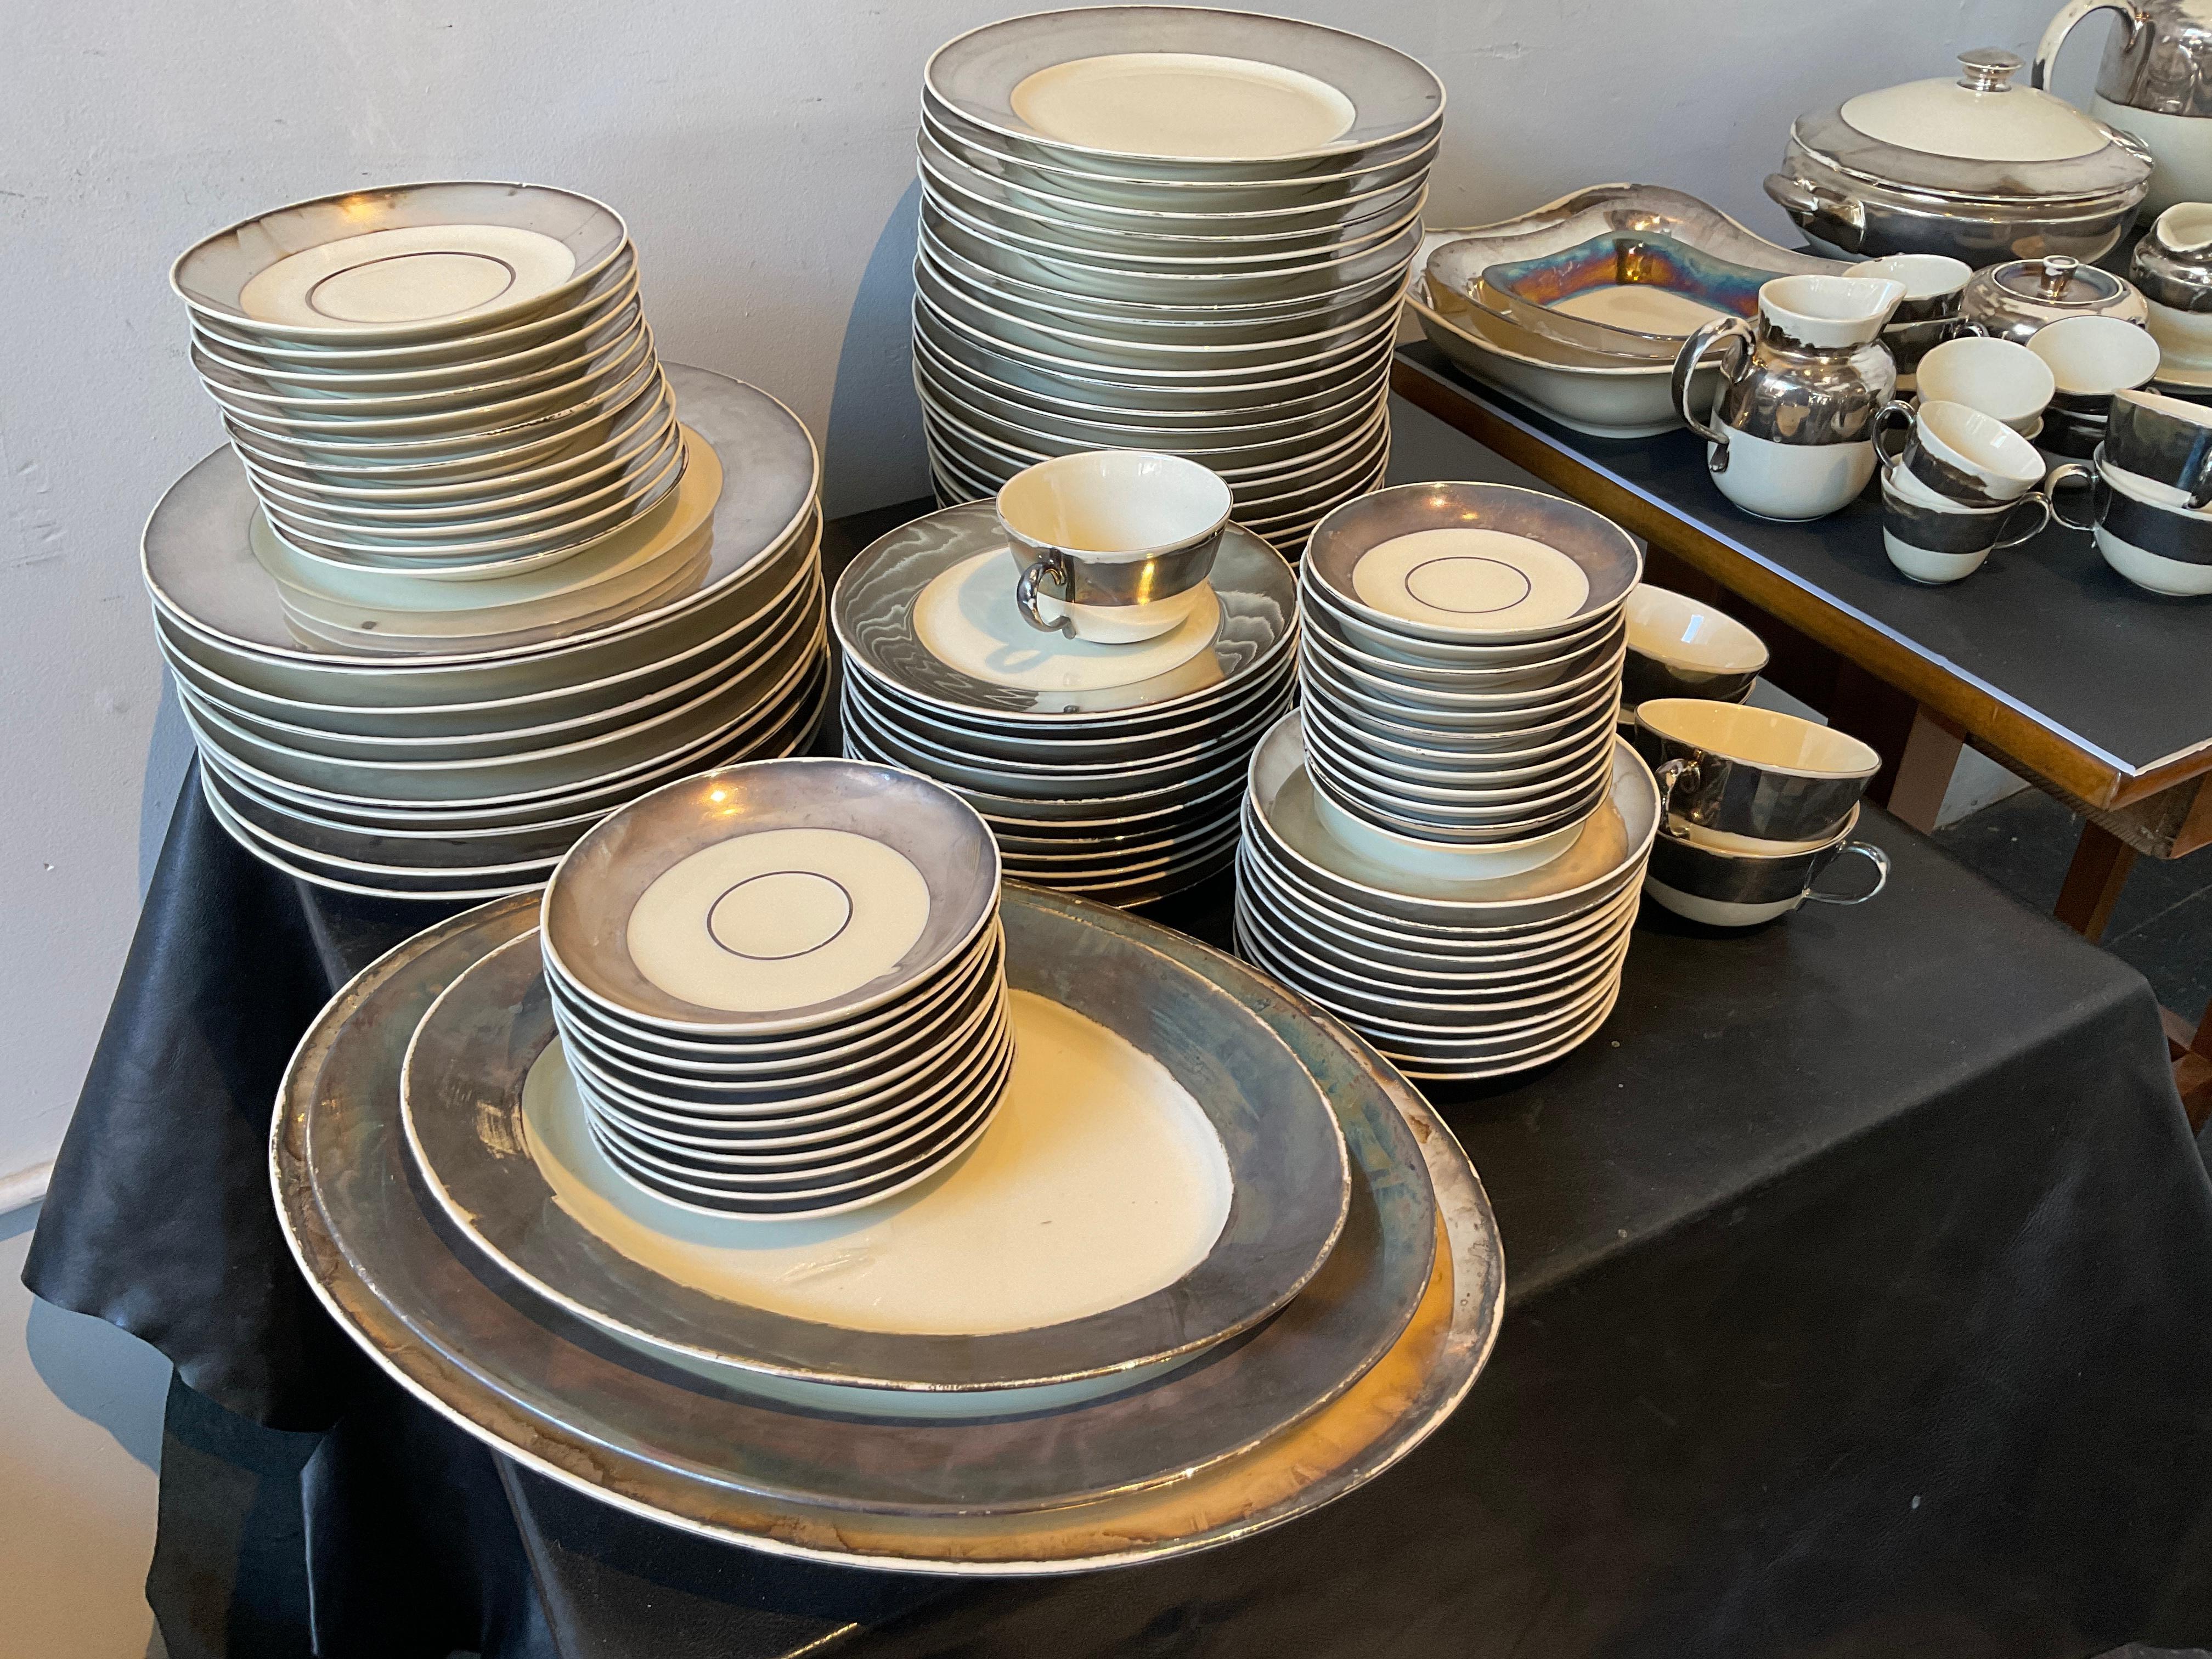 10 Dinner plates
3 platters
3 Square platters, one chipped.
10 soup bowls
24 salad plates
12 dessert plates
11 bread plates, one chipped.
12 soup saucers, one hairline crack.
11 coffee saucers
10 coffee cups 
12 espresso saucers
9 espresso cups
1